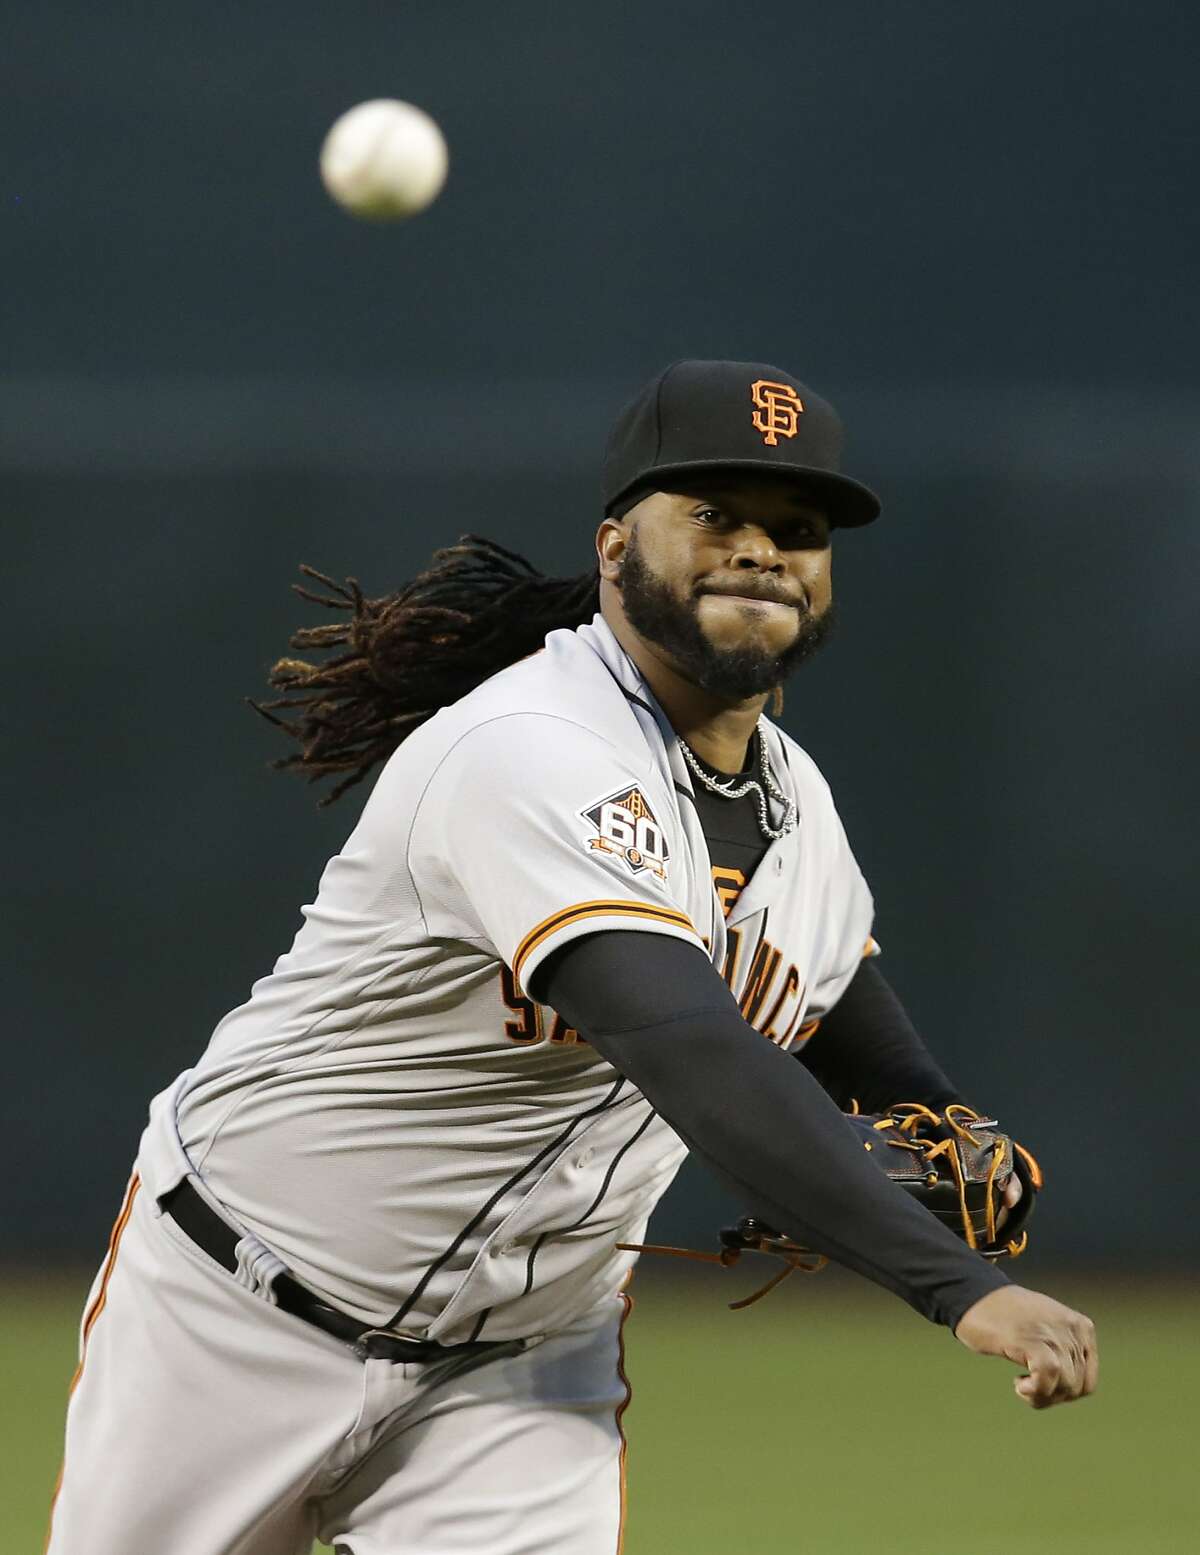 San Francisco Giants starting pitcher Johnny Cueto (47) in the first inning during a baseball game against the Arizona Diamondbacks, Tuesday, April 17, 2018, in Phoenix. (AP Photo/Rick Scuteri)